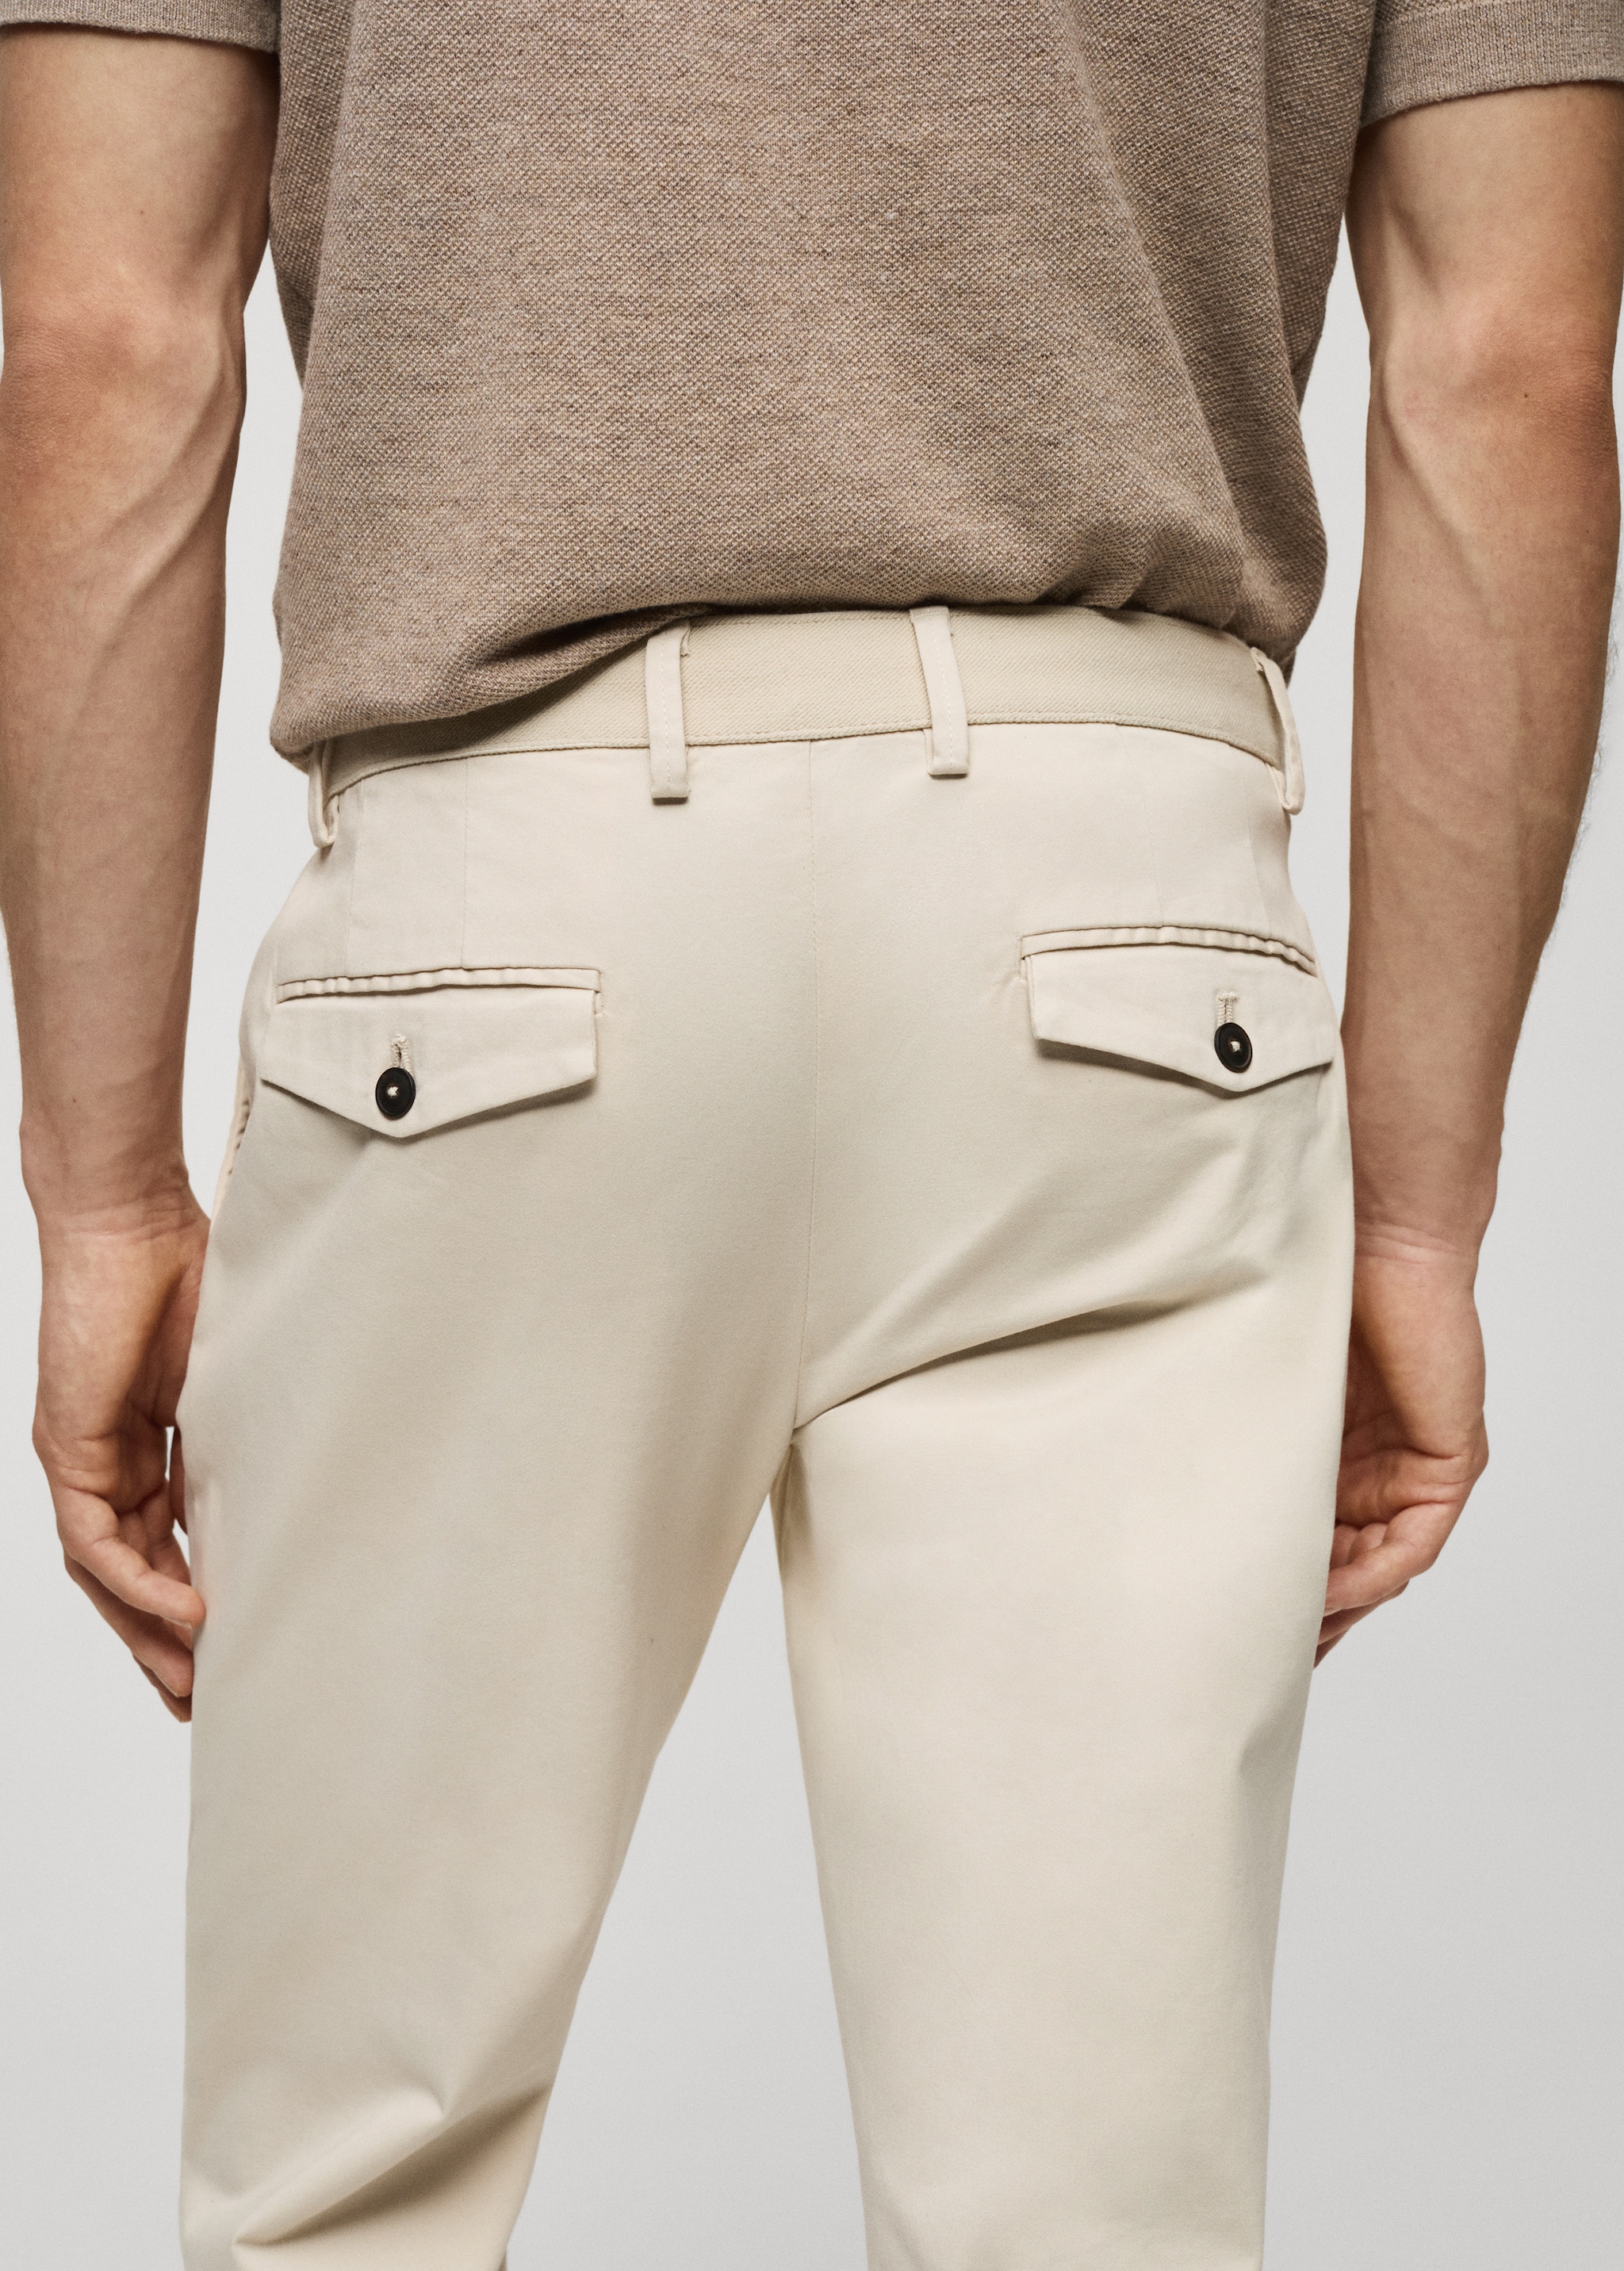 Cotton tapered crop pants - Details of the article 4